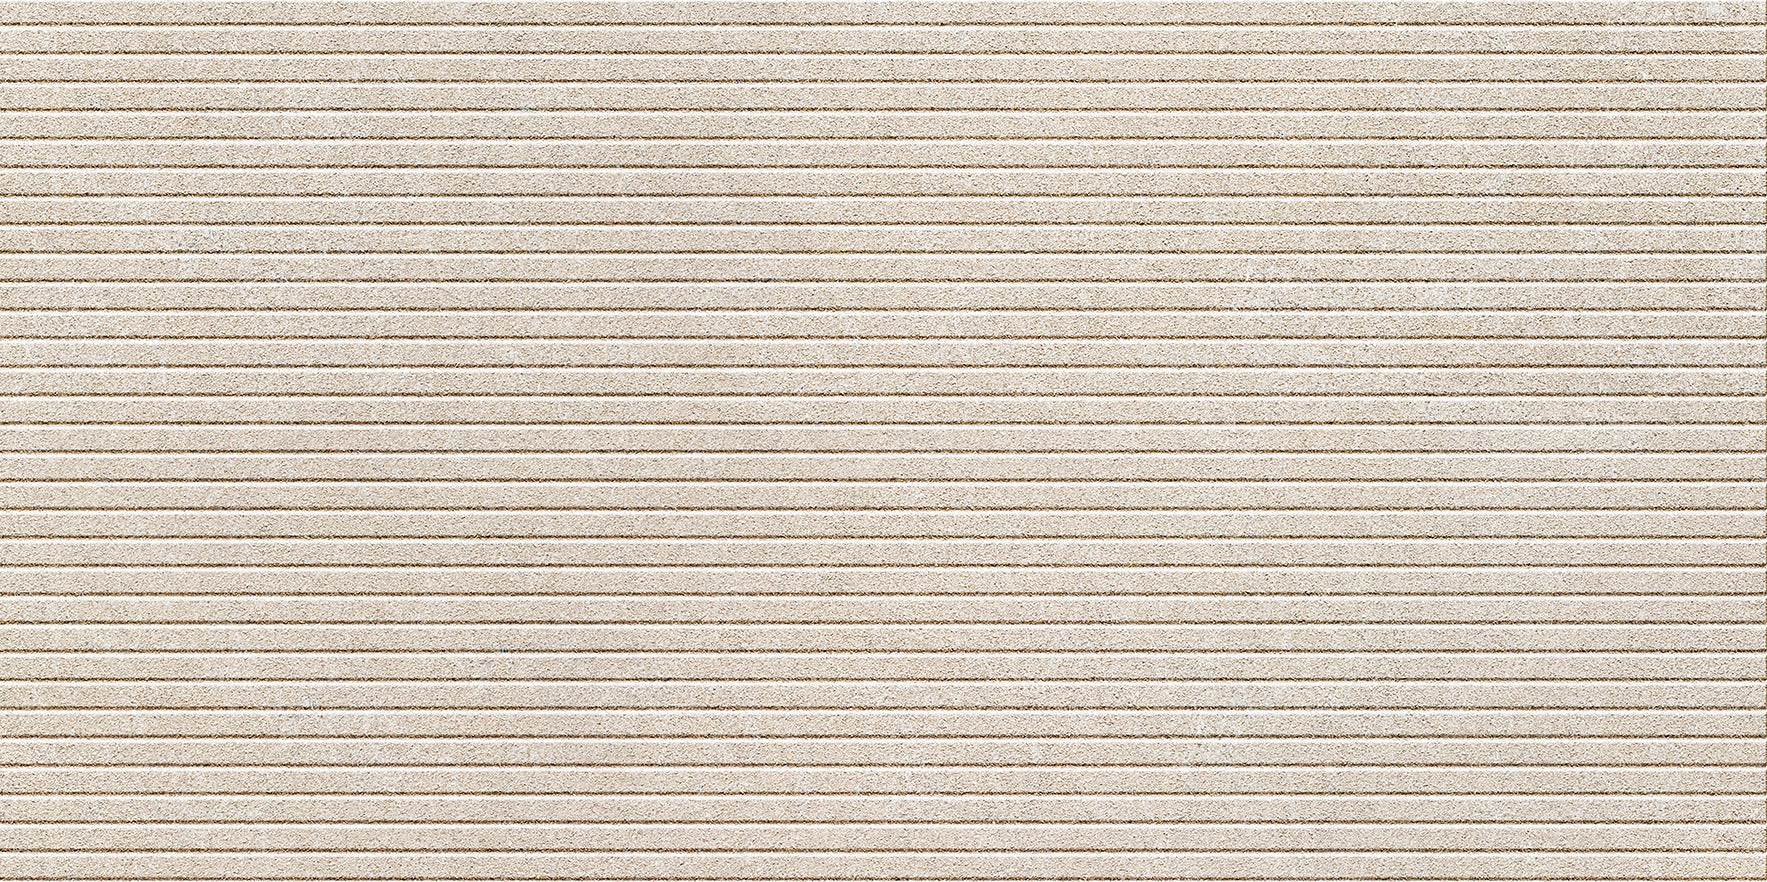 landmark 9 mm atelier buff indiana salem grove_large wall field tile 12x24x9mm matte rectified porcelain tile distributed by surface group international